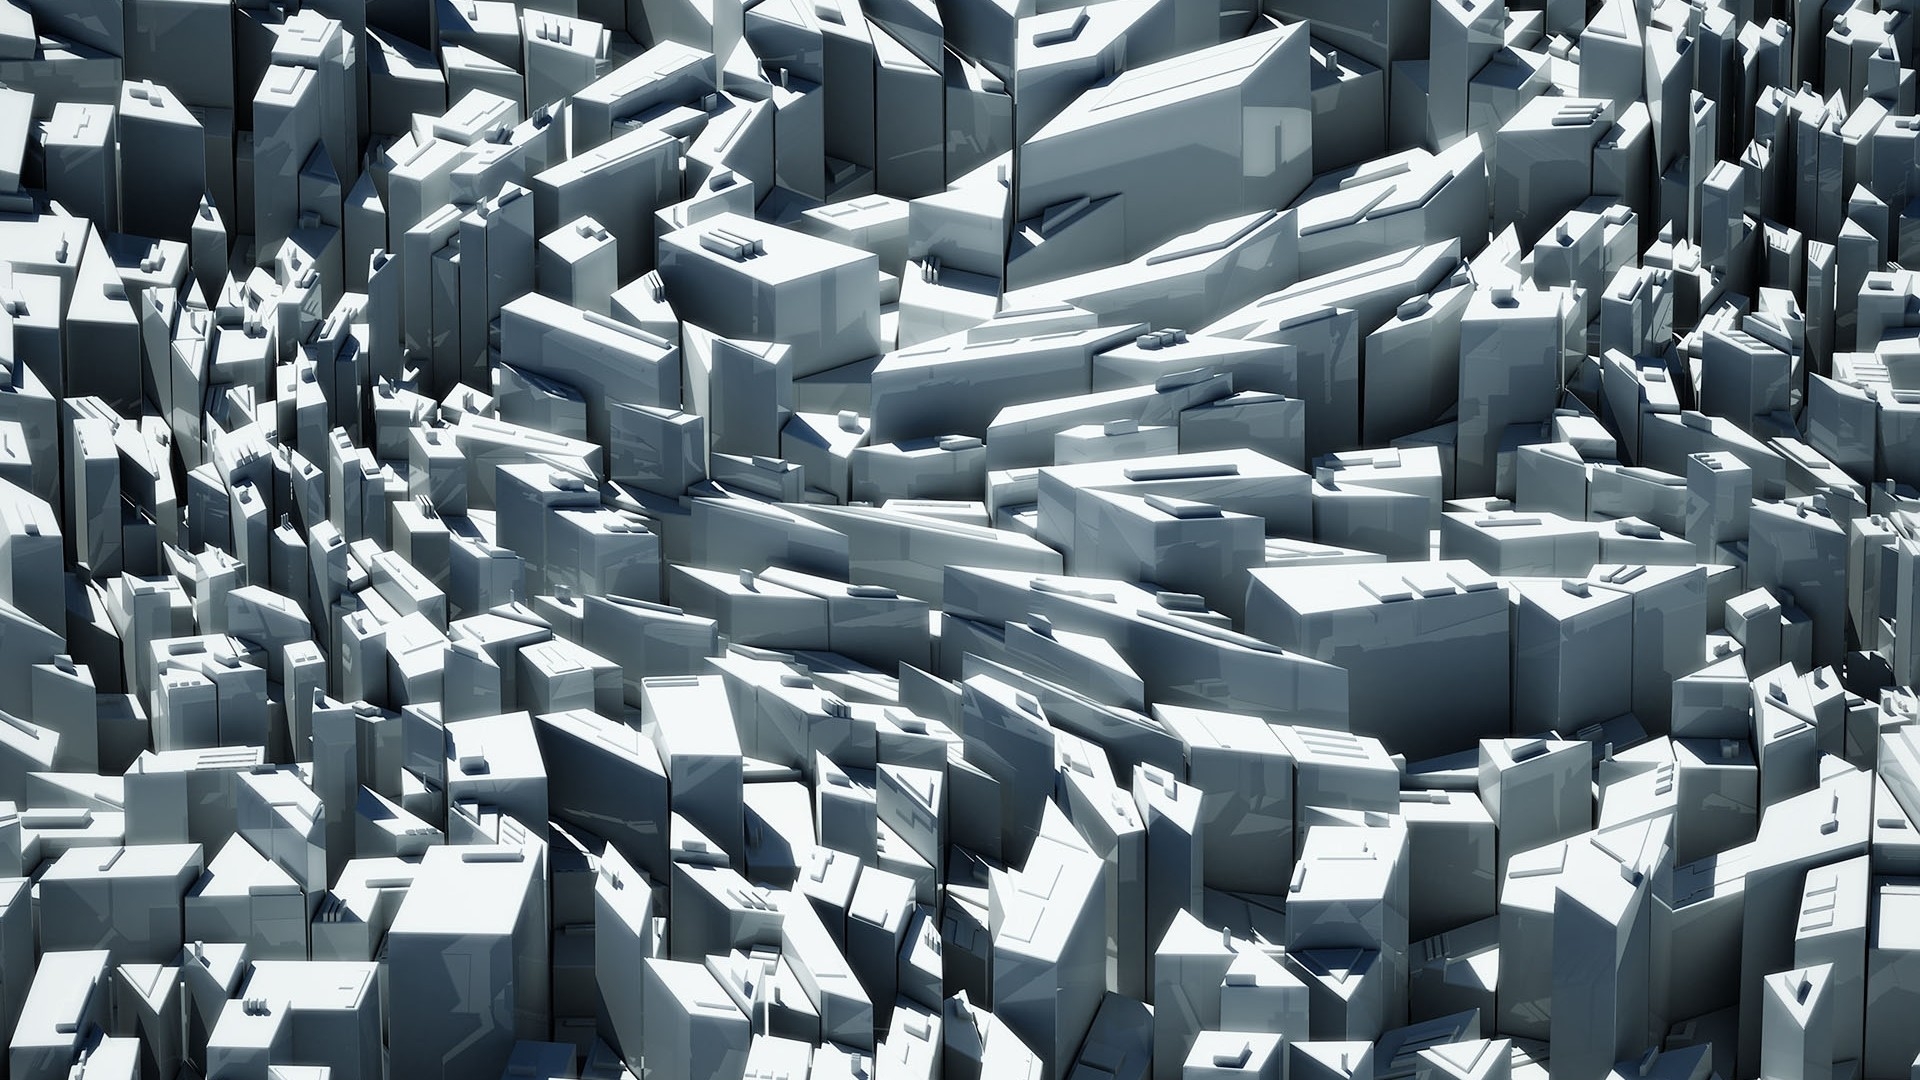 abstract 3d render 1920x1080 wallpaper High Quality Wallpapers,High ...